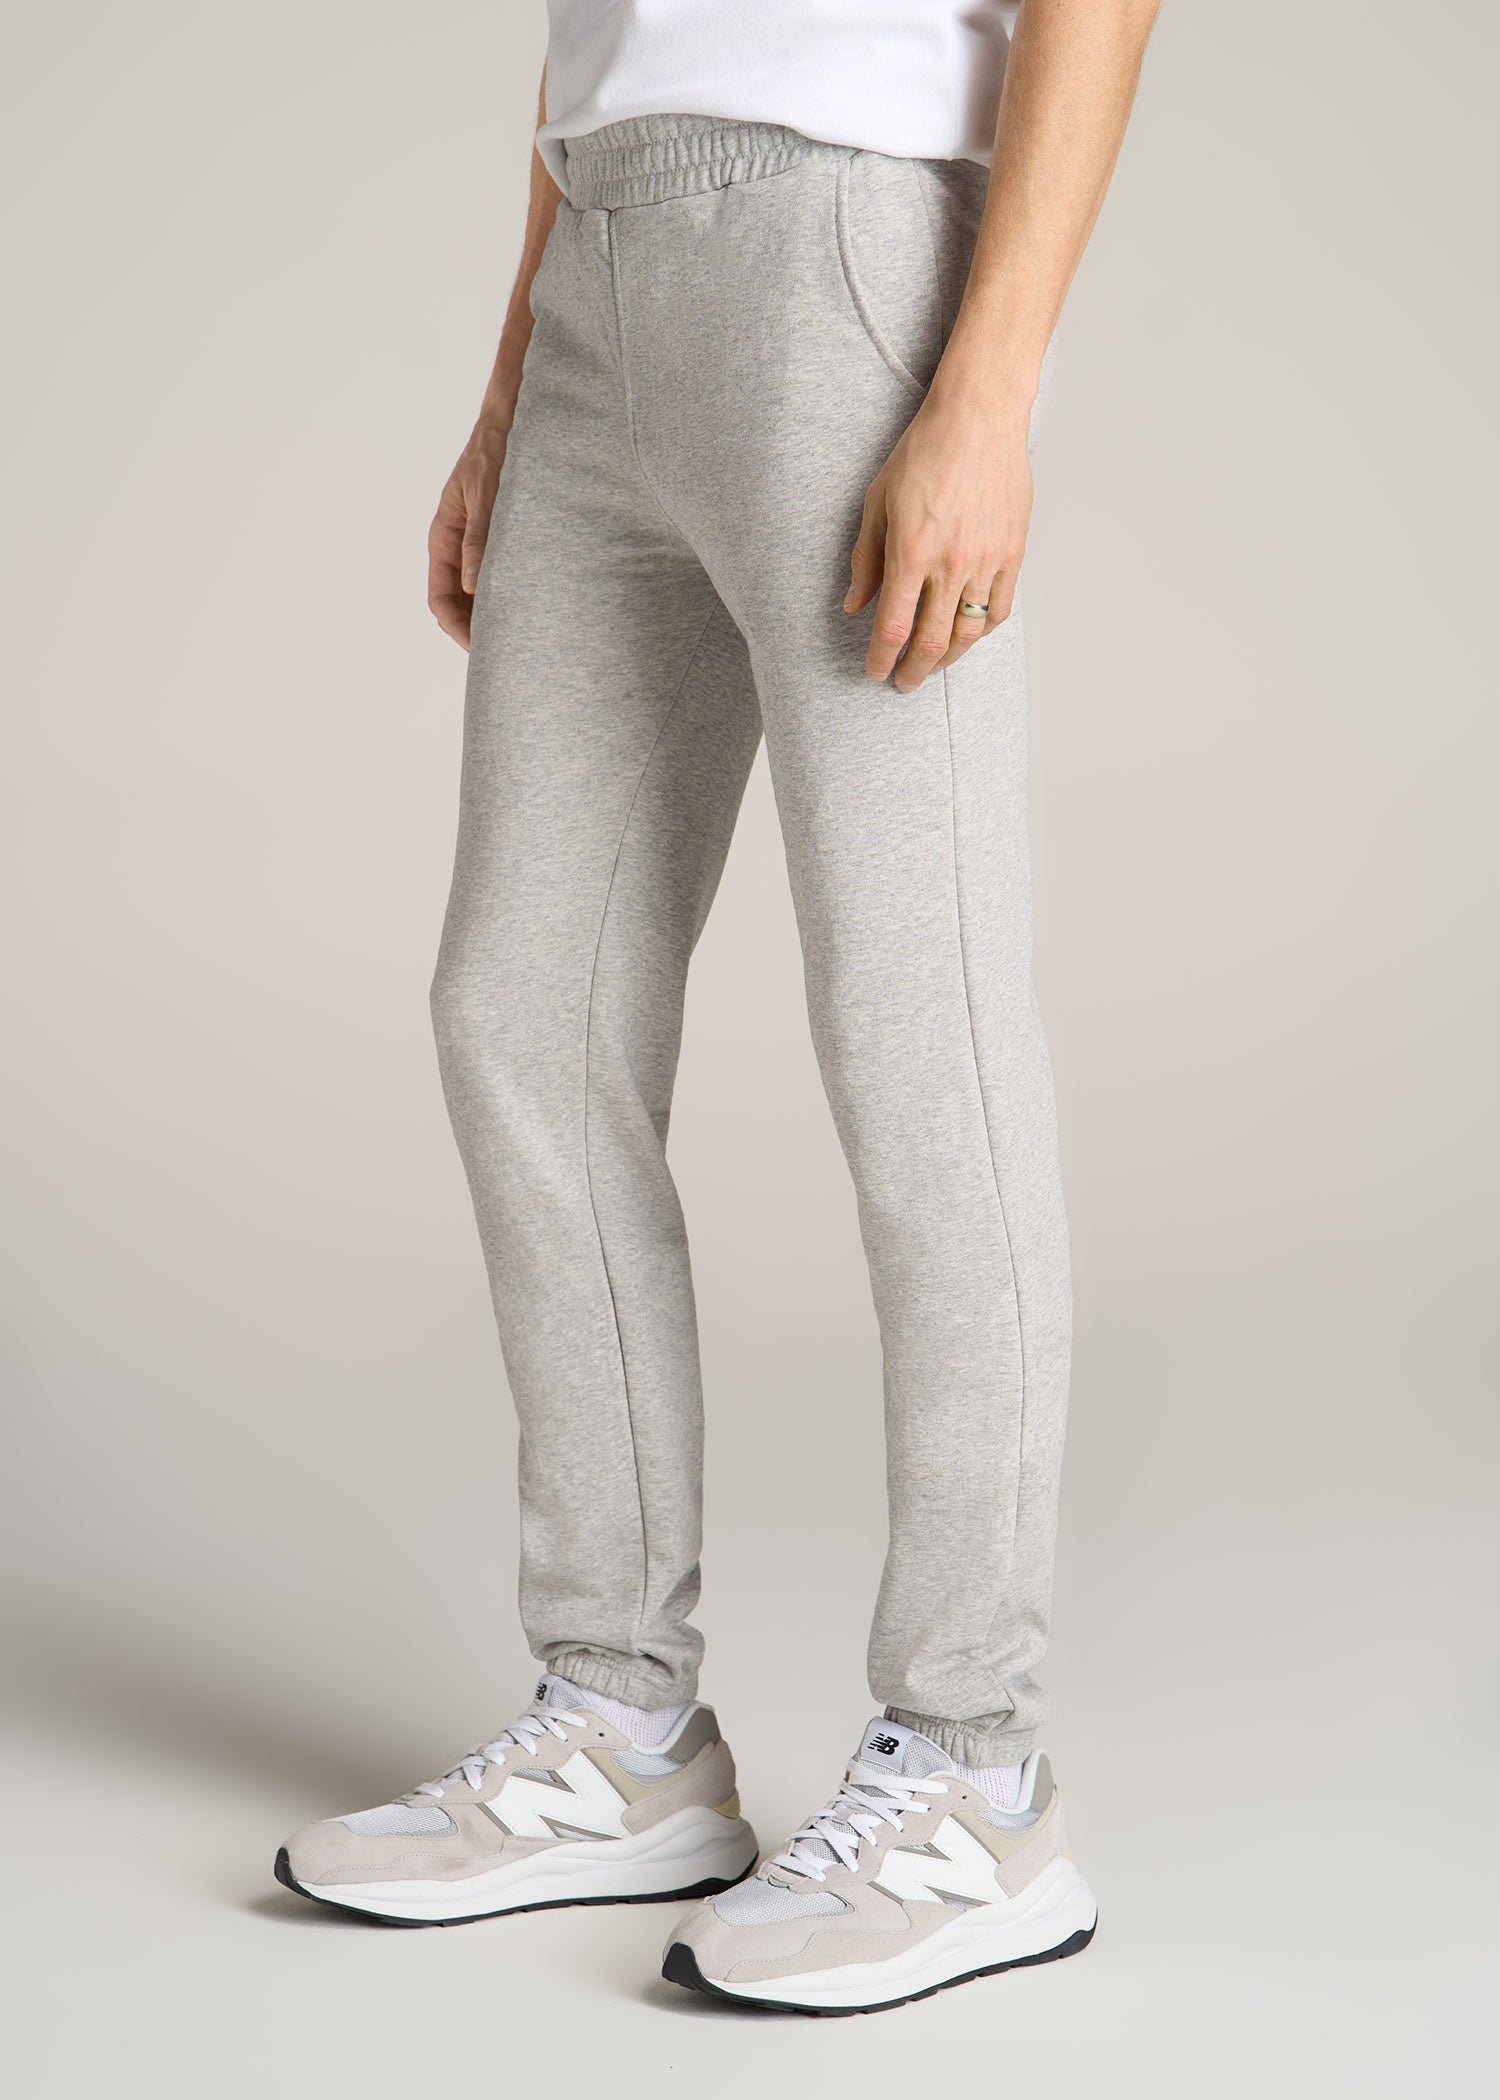 Men's Tall French Terry Sweatpants: Grey Mix Sweatpants – American